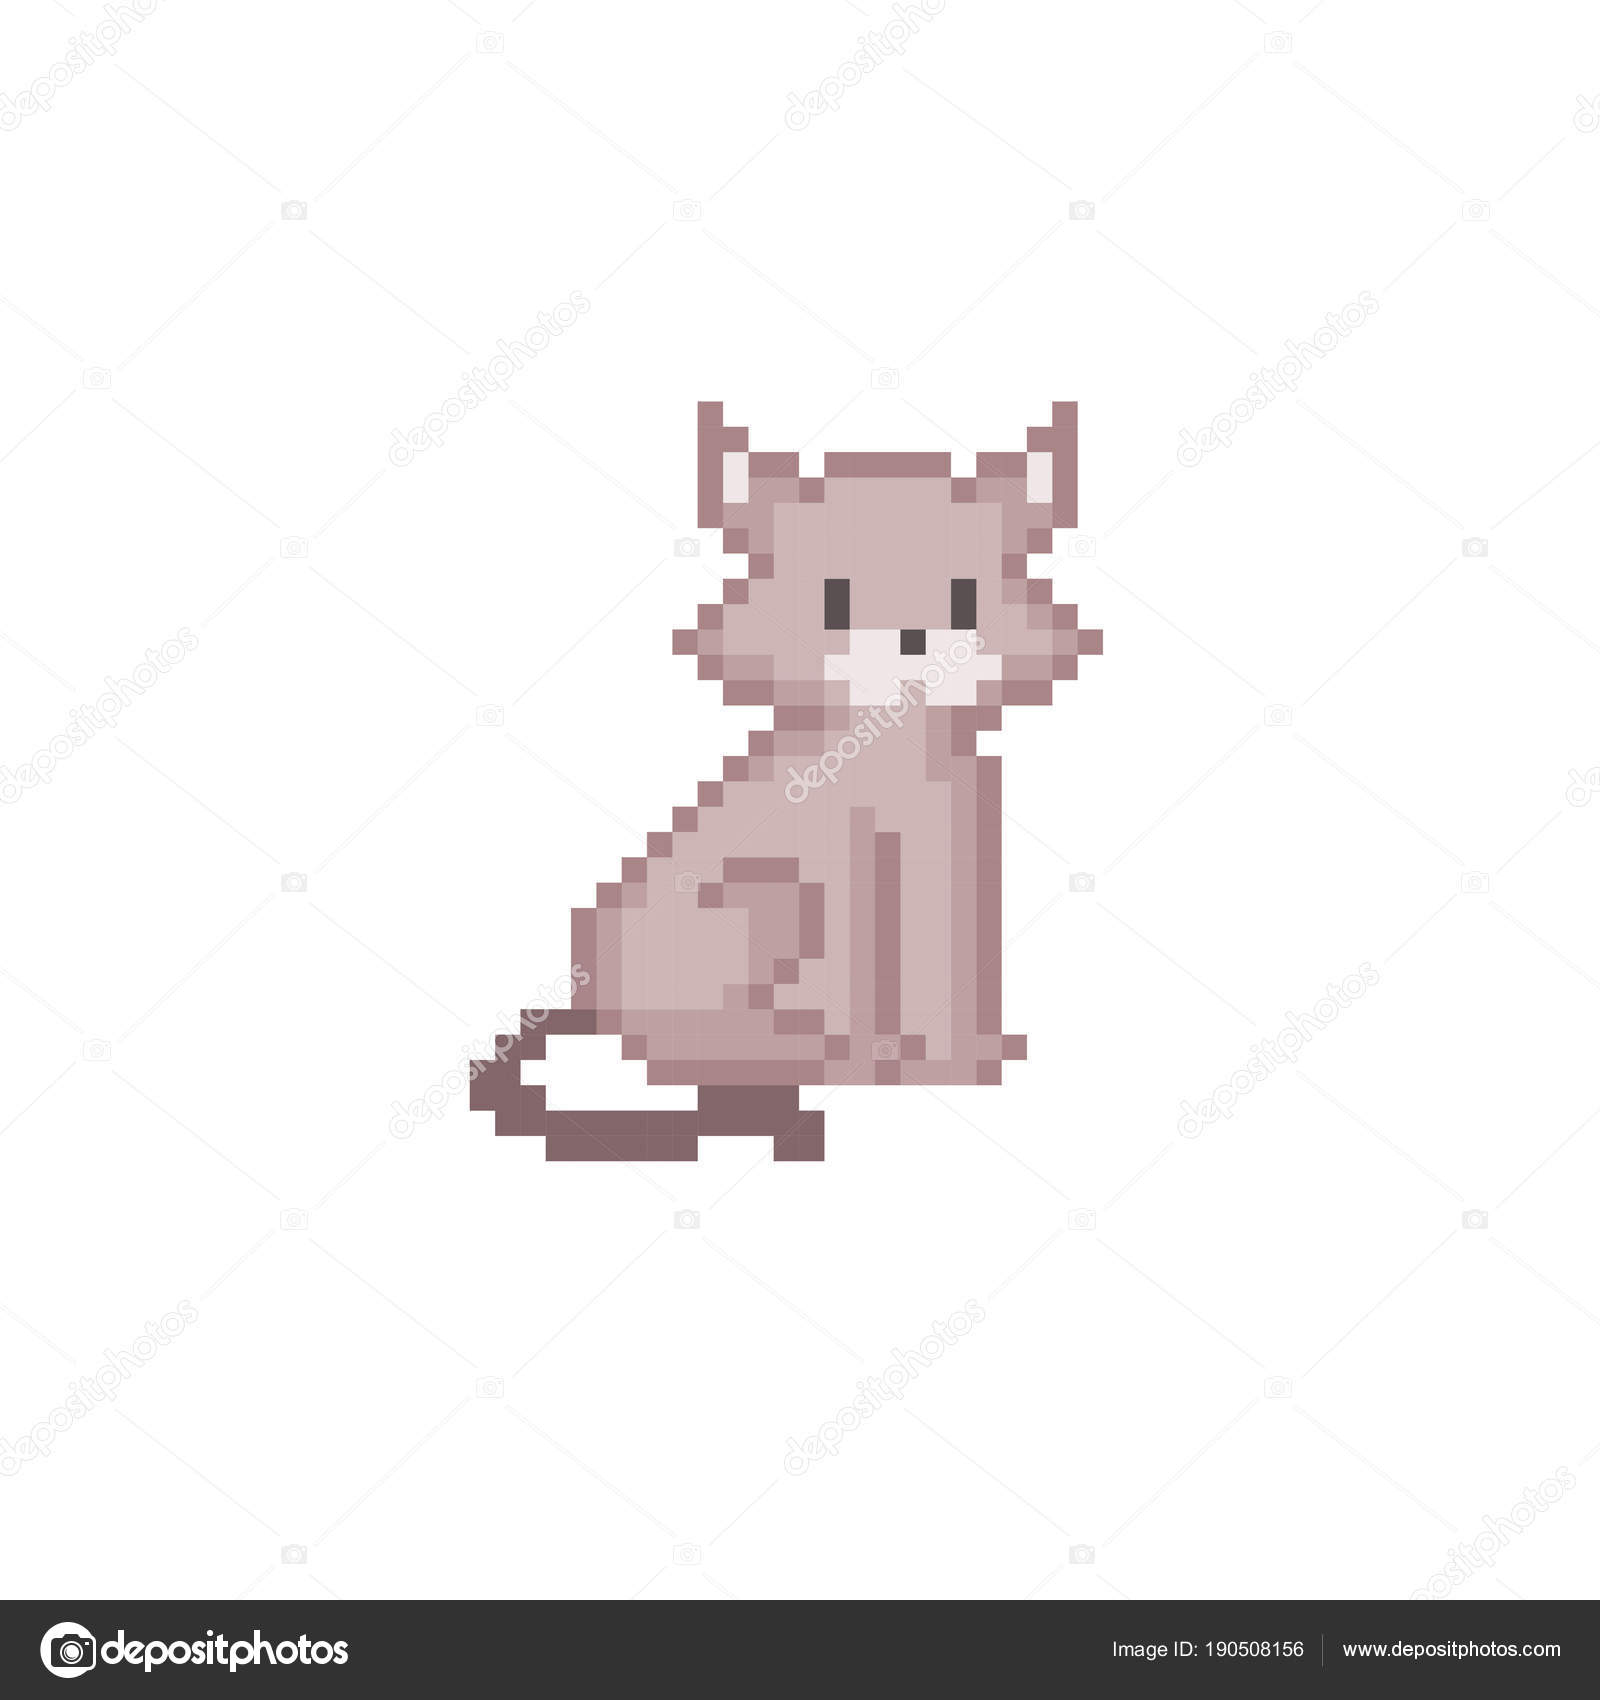 Cat Pixel Stock Vector Illustration and Royalty Free Cat Pixel Clipart